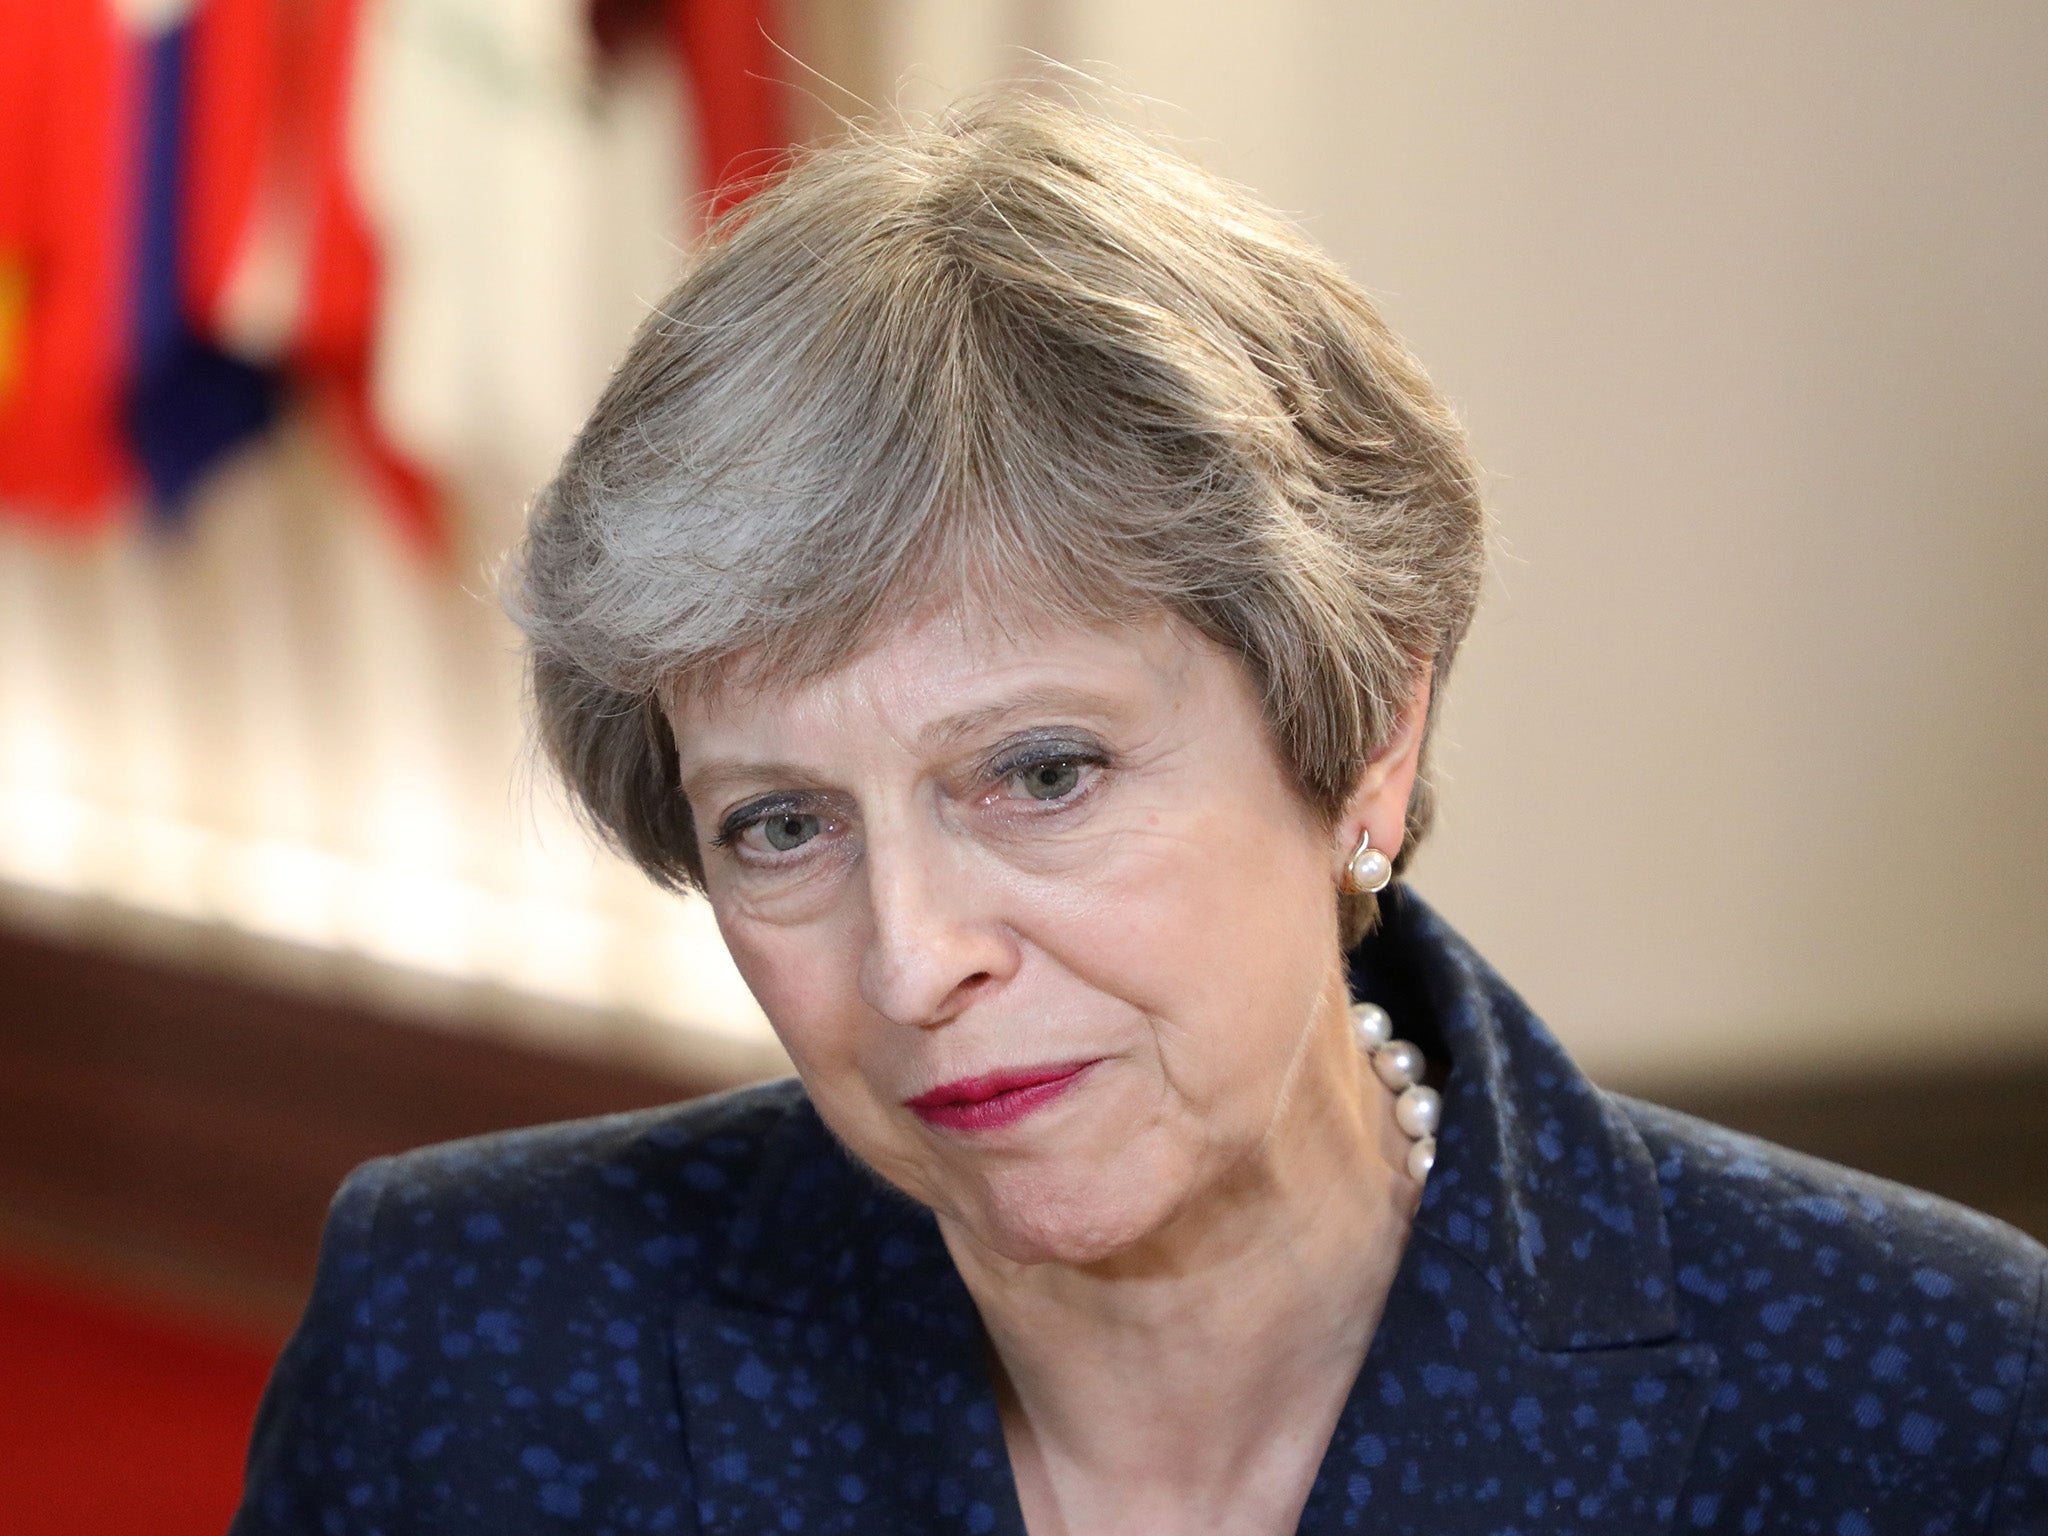 Brexit: 46 Conservative MPs write to Theresa May demanding she &apos;listen to the voice of business now&apos;